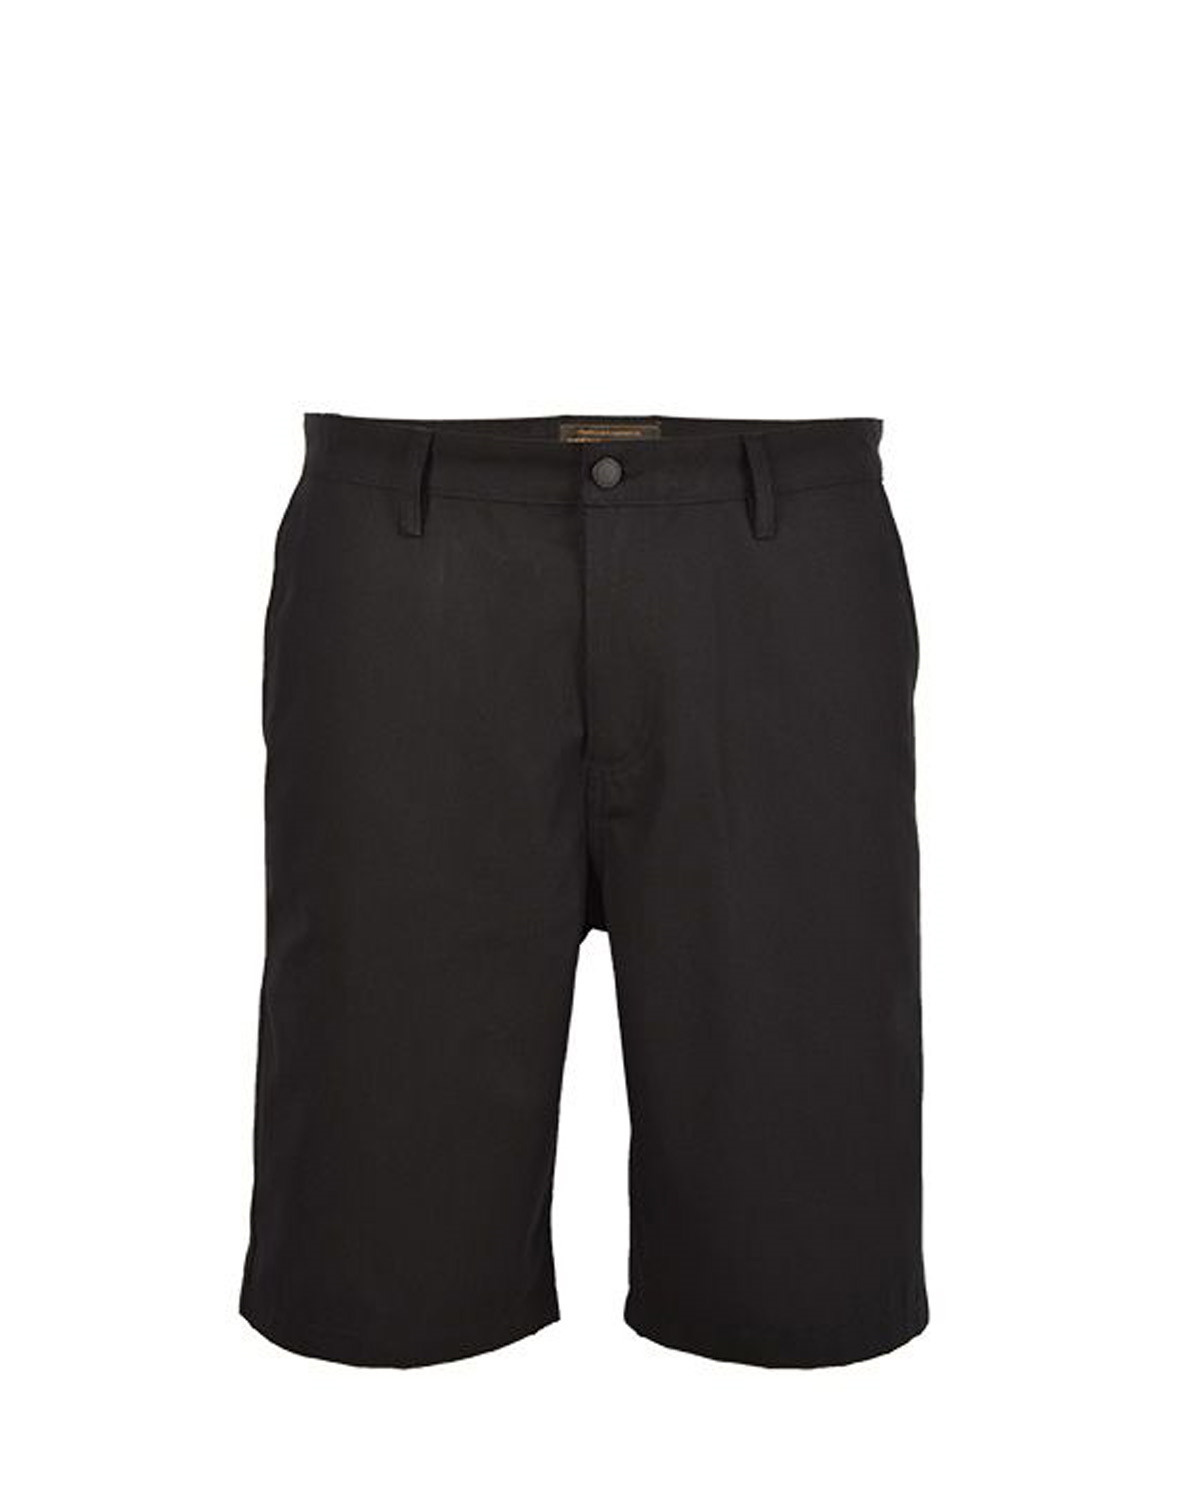 WRENCHMONKEES Simple Shorts (Sort, W29)